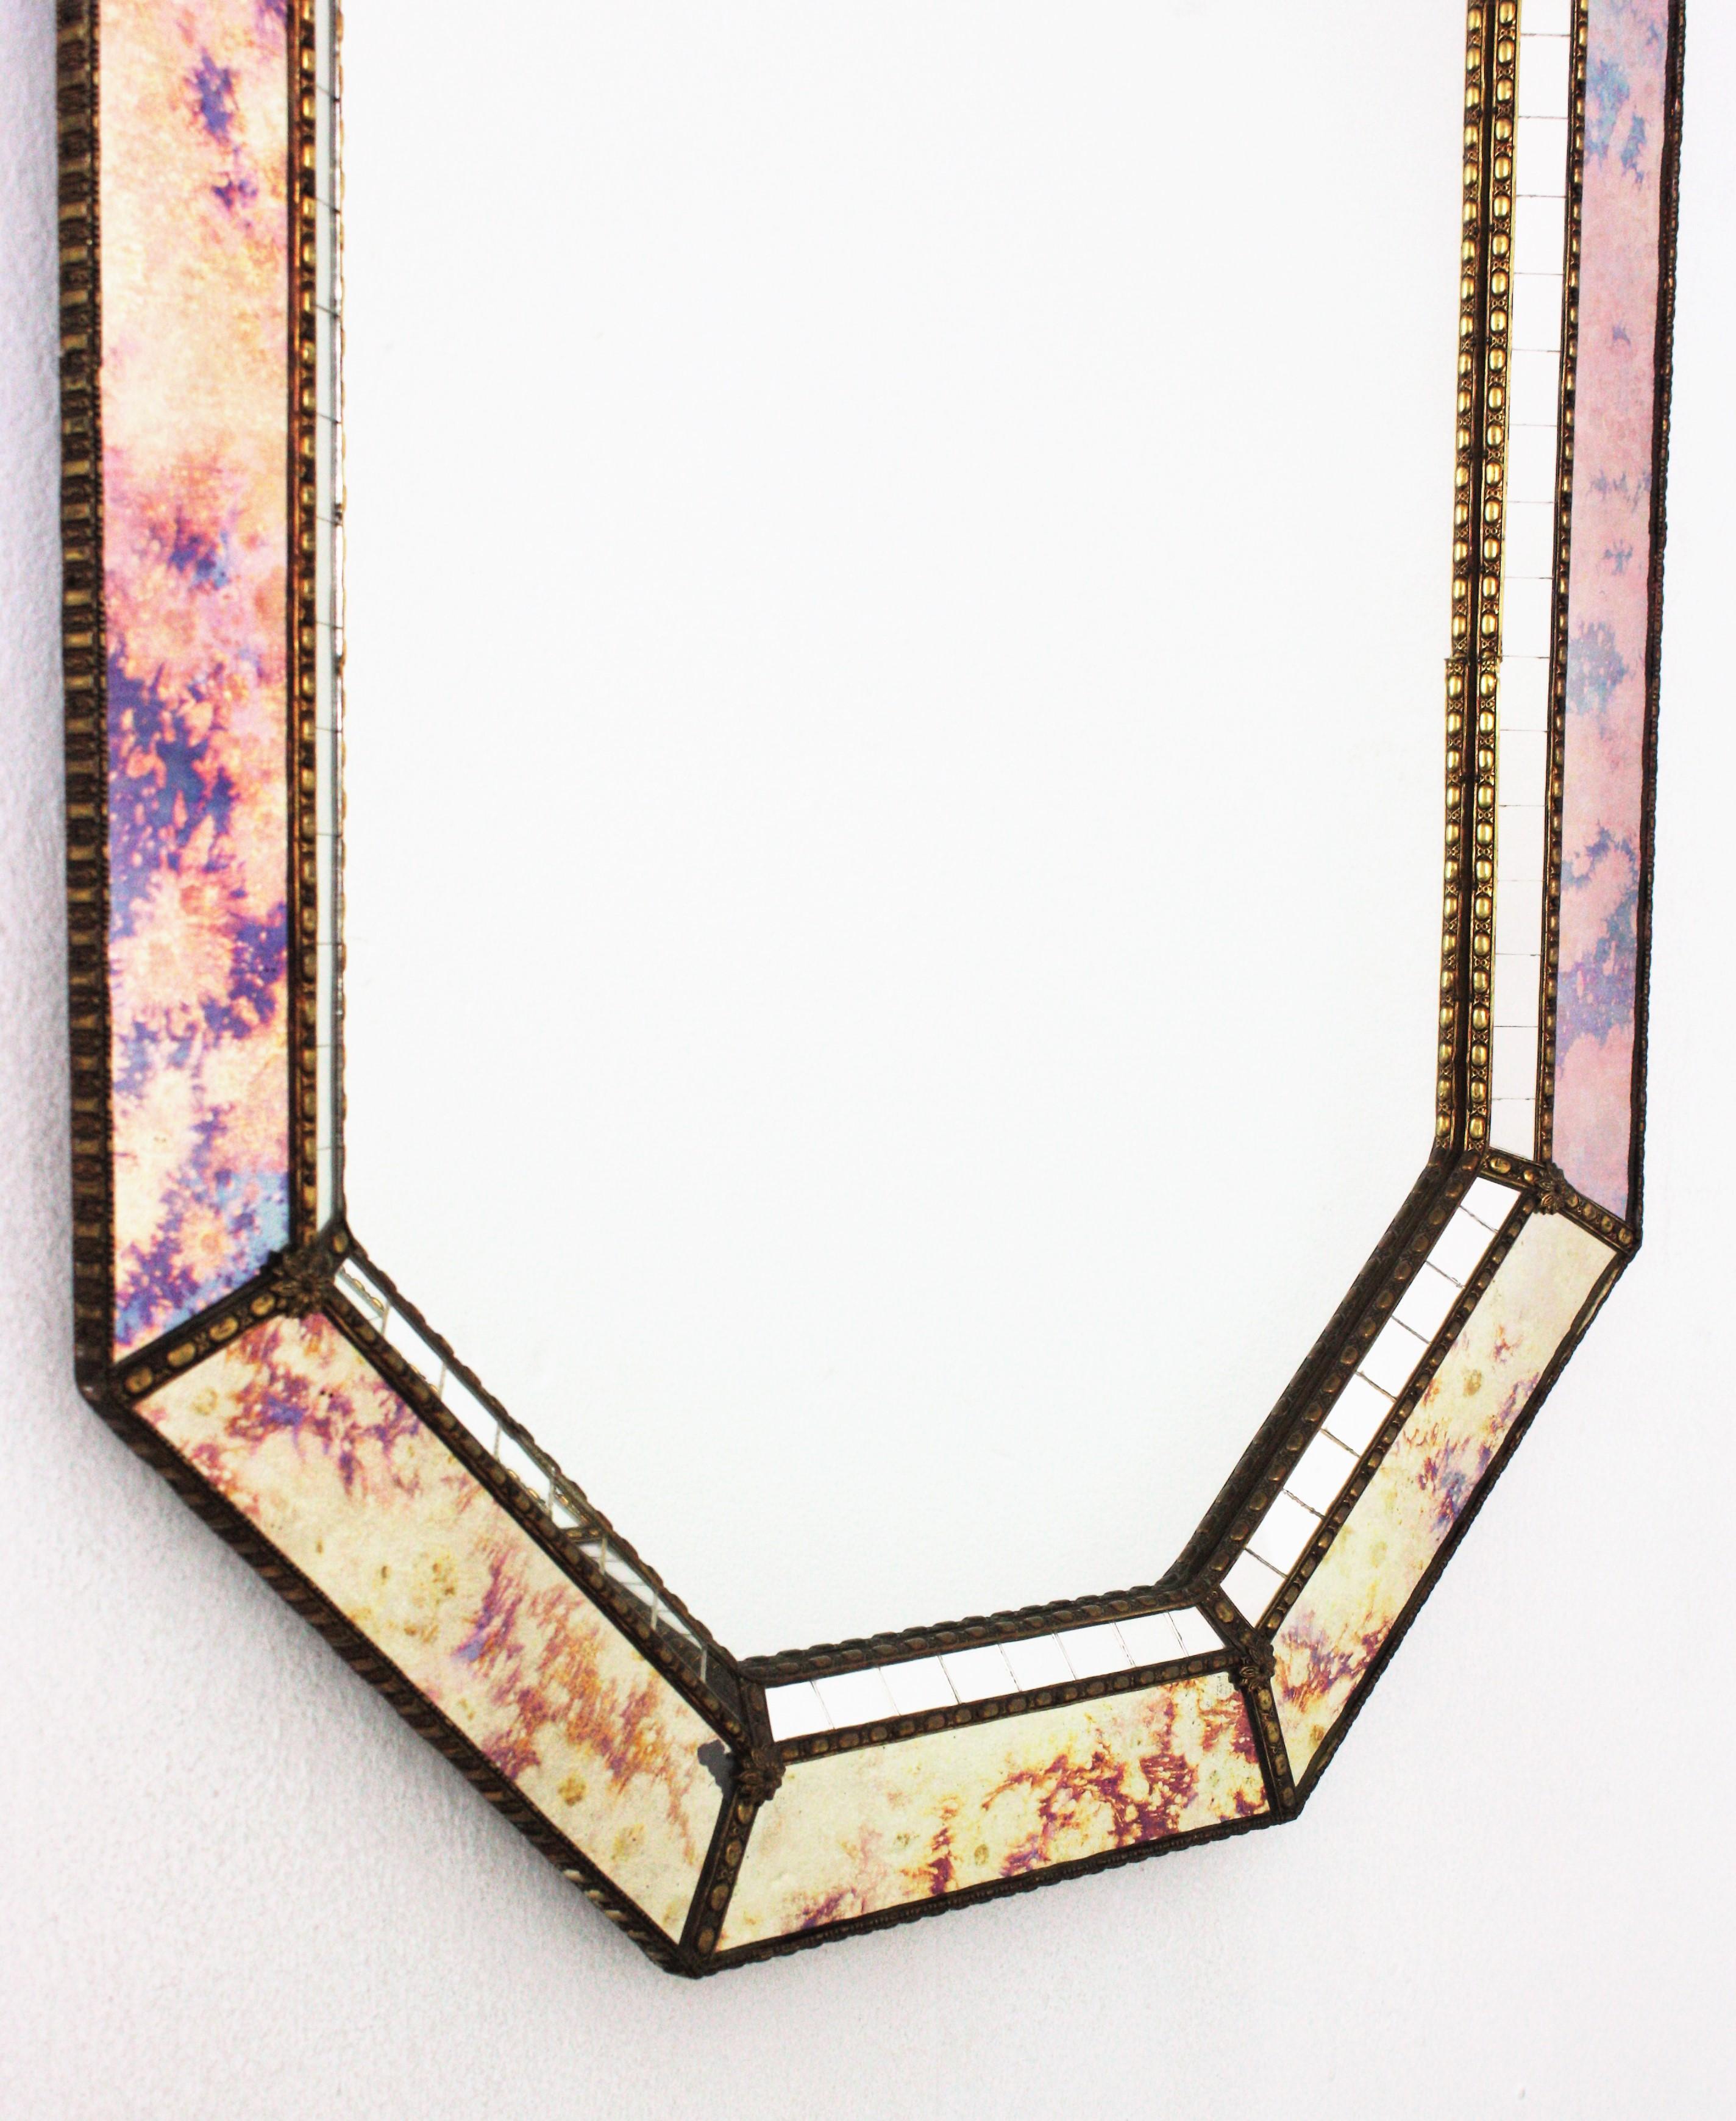 Hand-Crafted Octagonal Venetian Style Mirror with Iridiscent Glasses and Brass Details